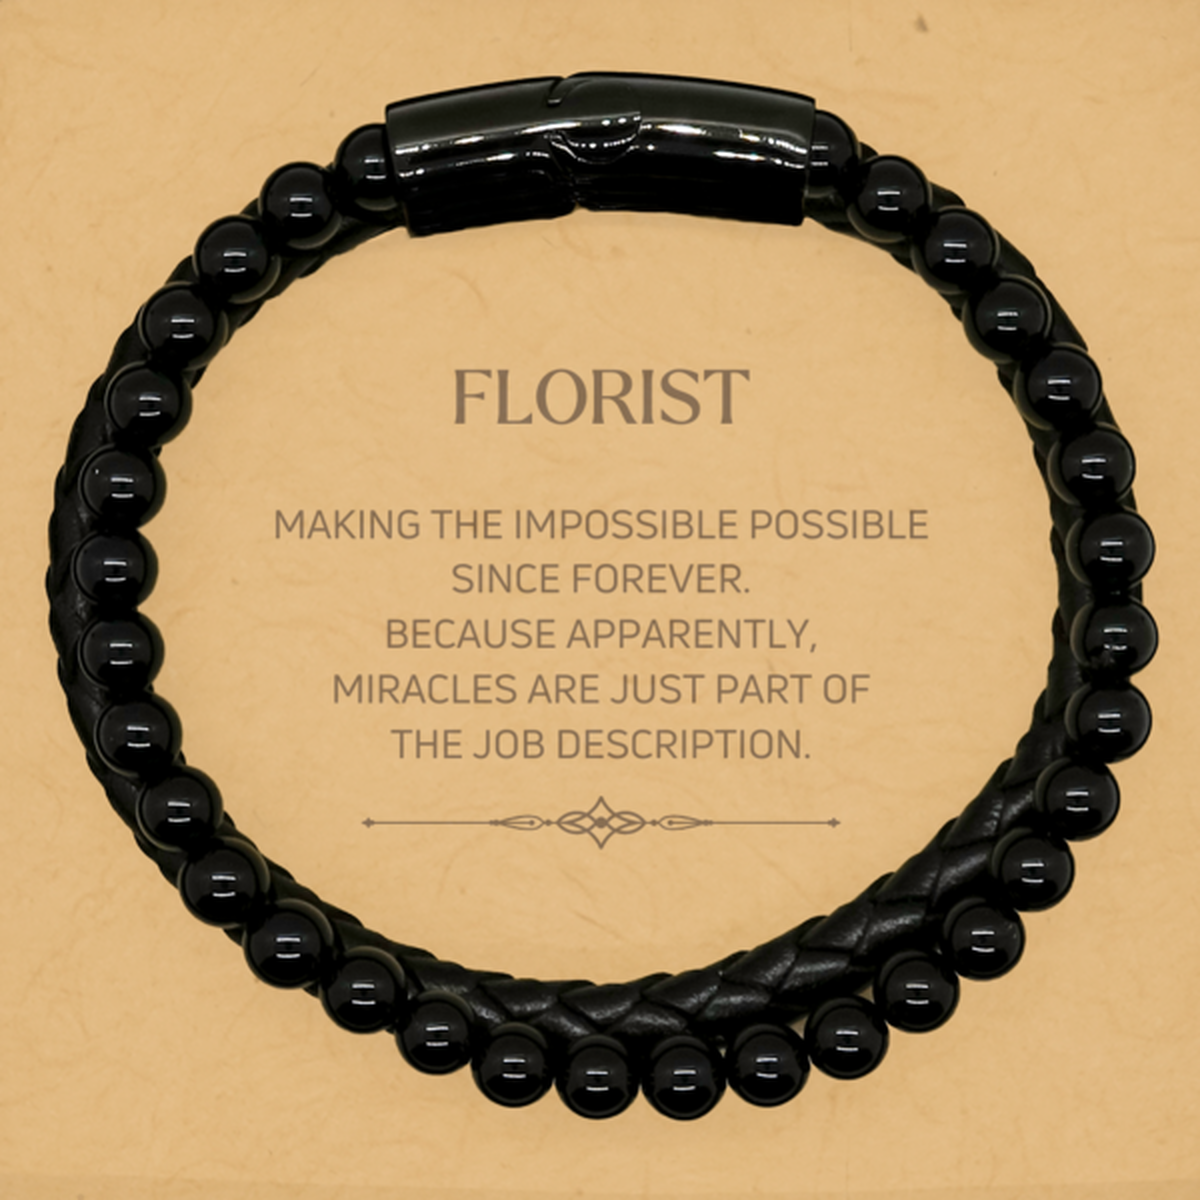 Funny Florist Gifts, Miracles are just part of the job description, Inspirational Birthday Stone Leather Bracelets For Florist, Men, Women, Coworkers, Friends, Boss